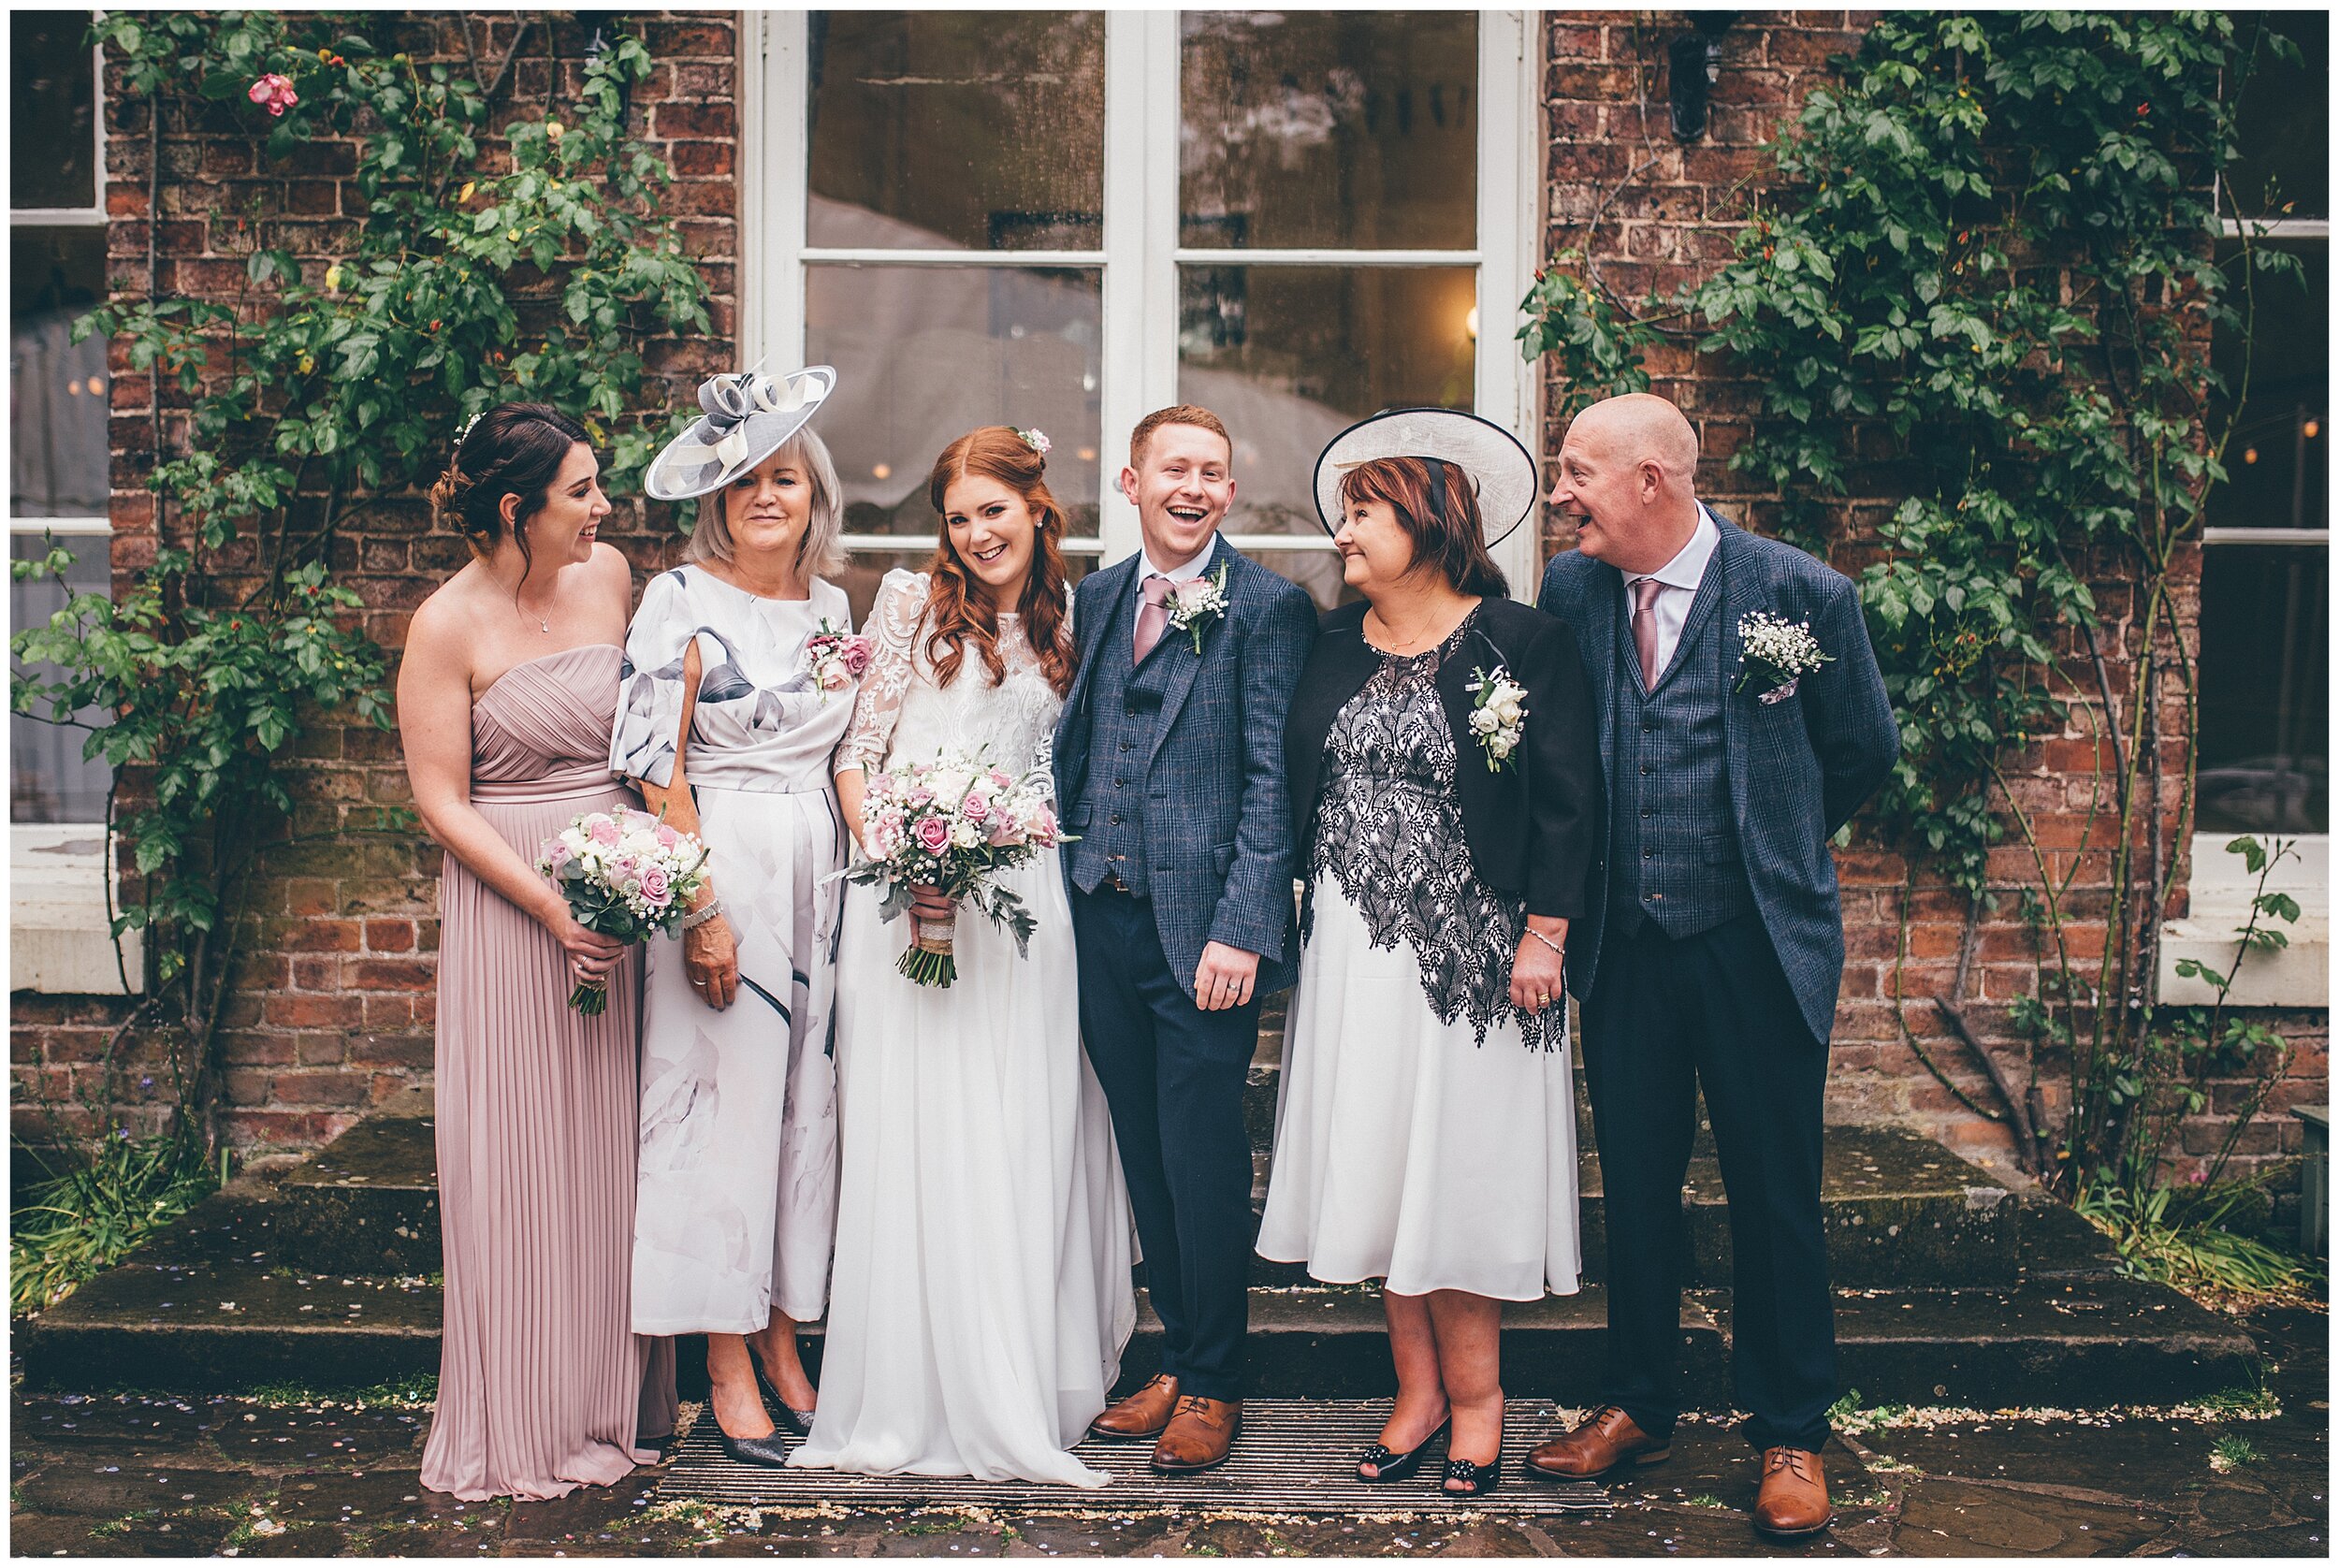 Beautiful family photograph at Cheshire wedding venue.